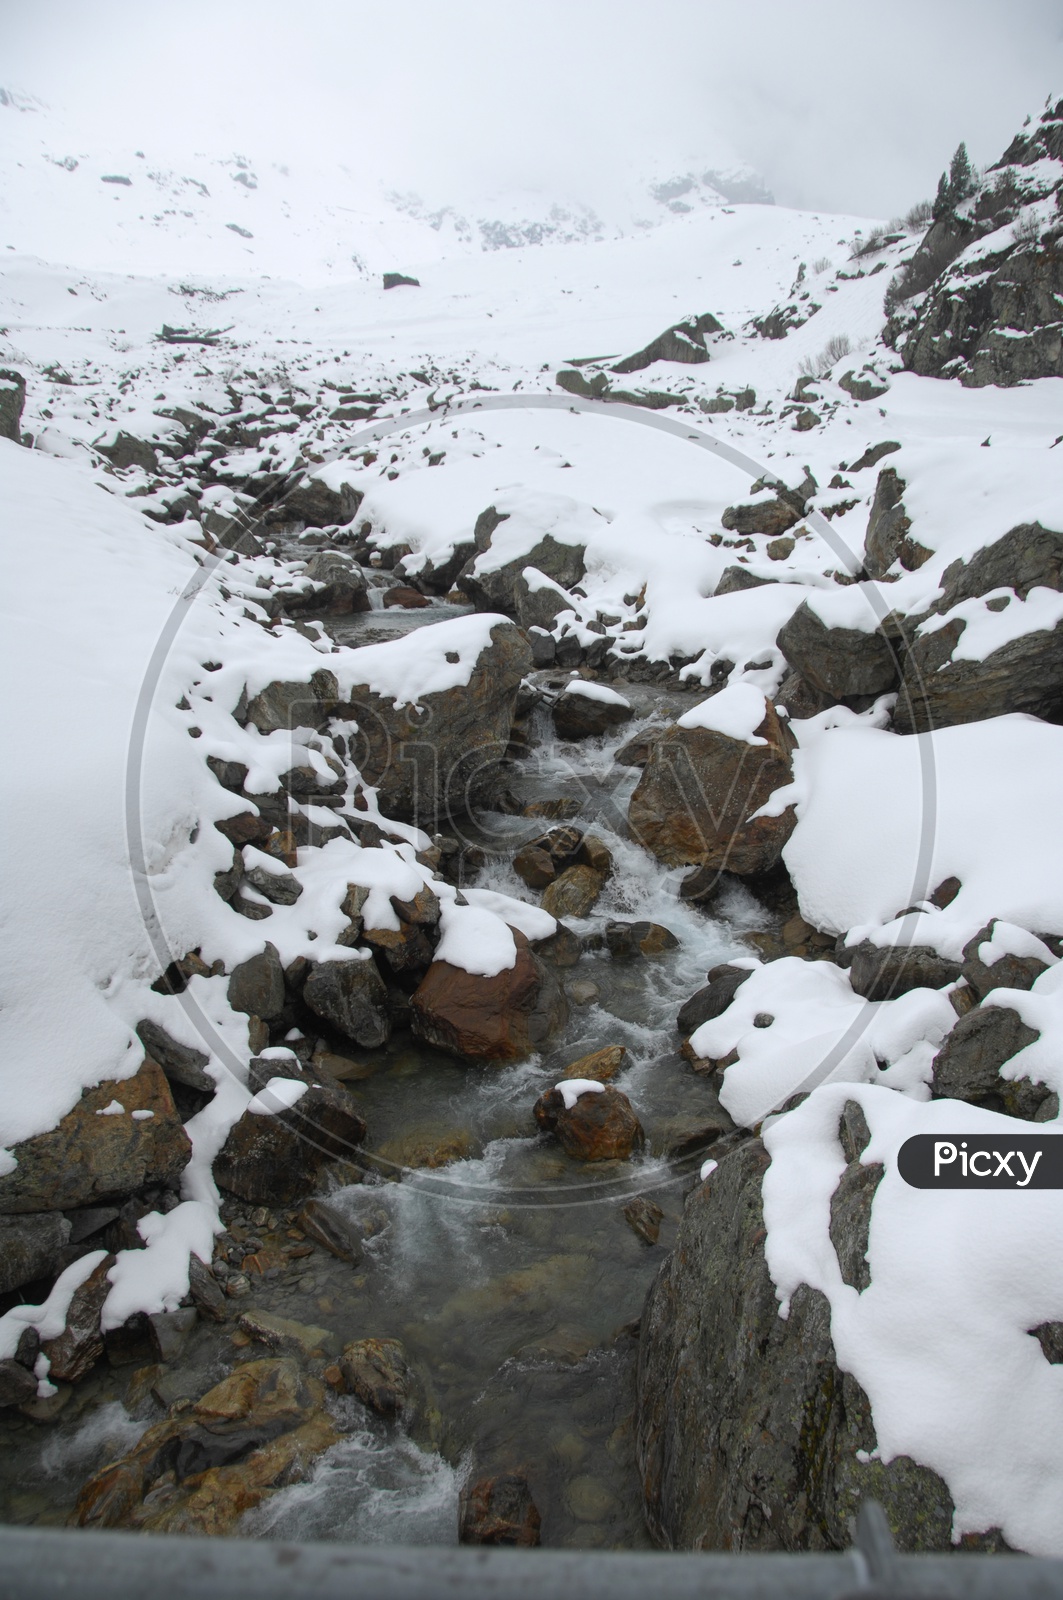 Water stream along the rocks covered with snow